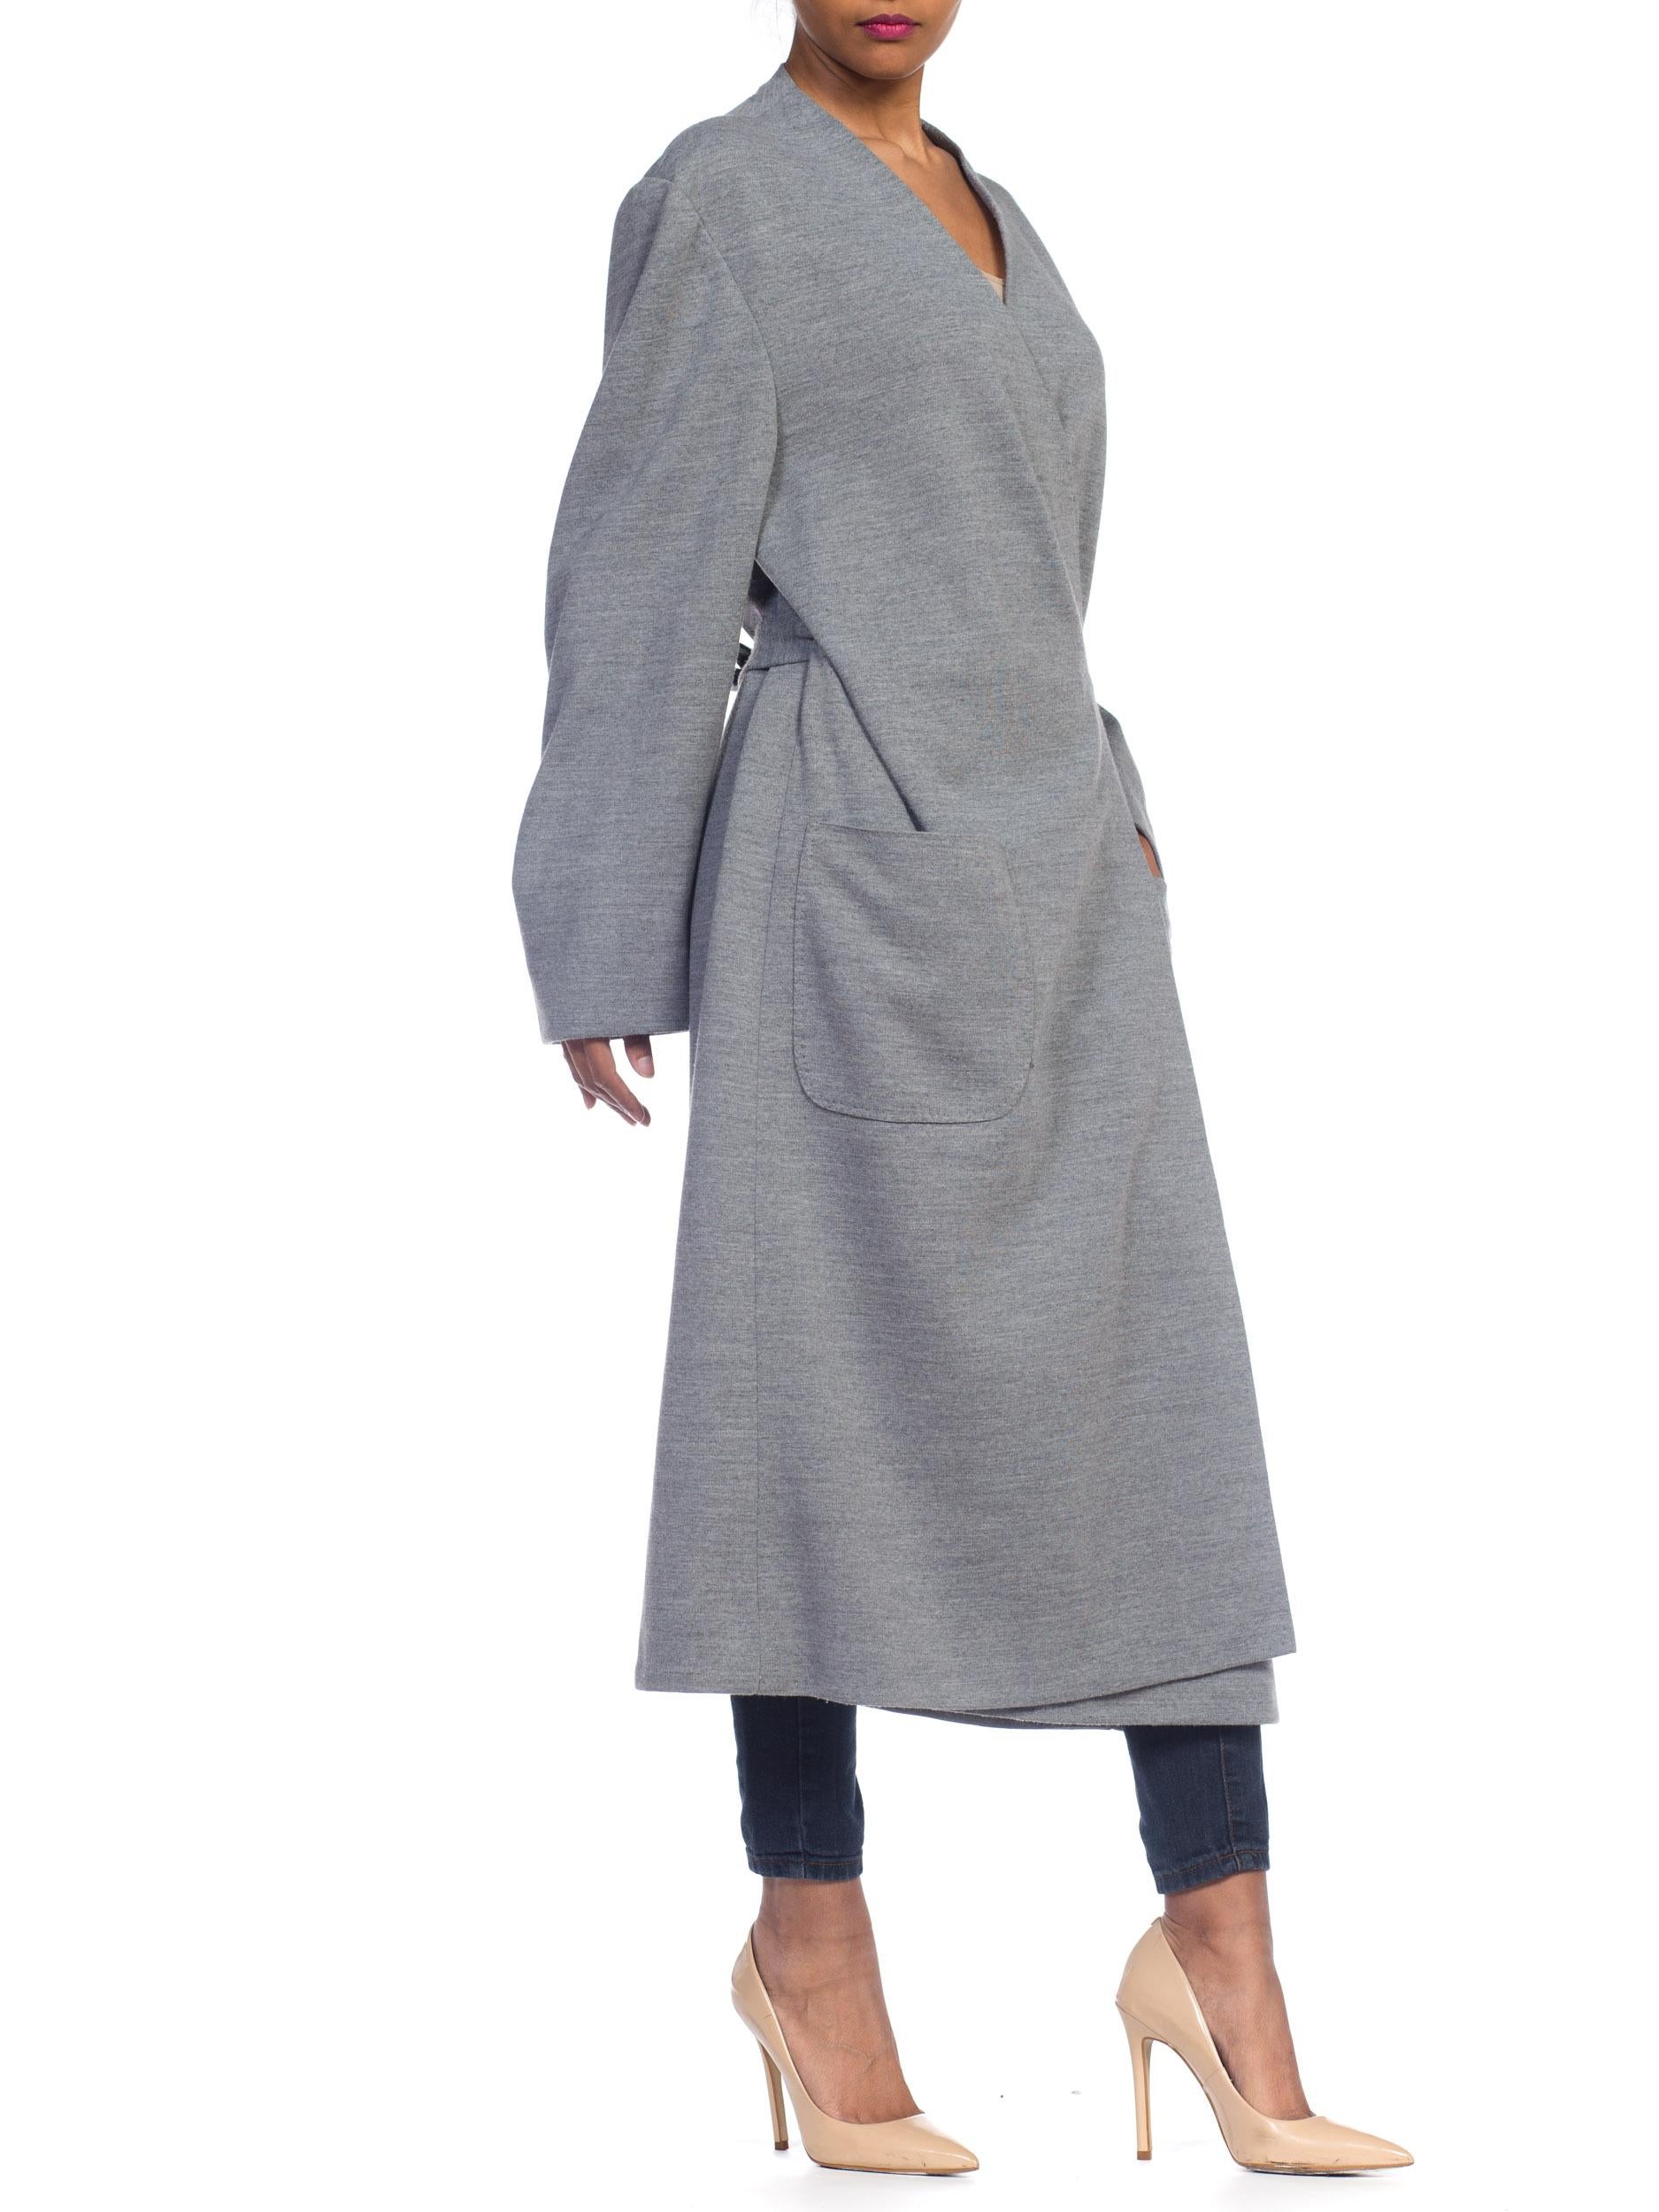 Women's 1980S Heather Grey Wool Knit Handmade Unlabeled Couture Wrap Sweater Coat For Sale